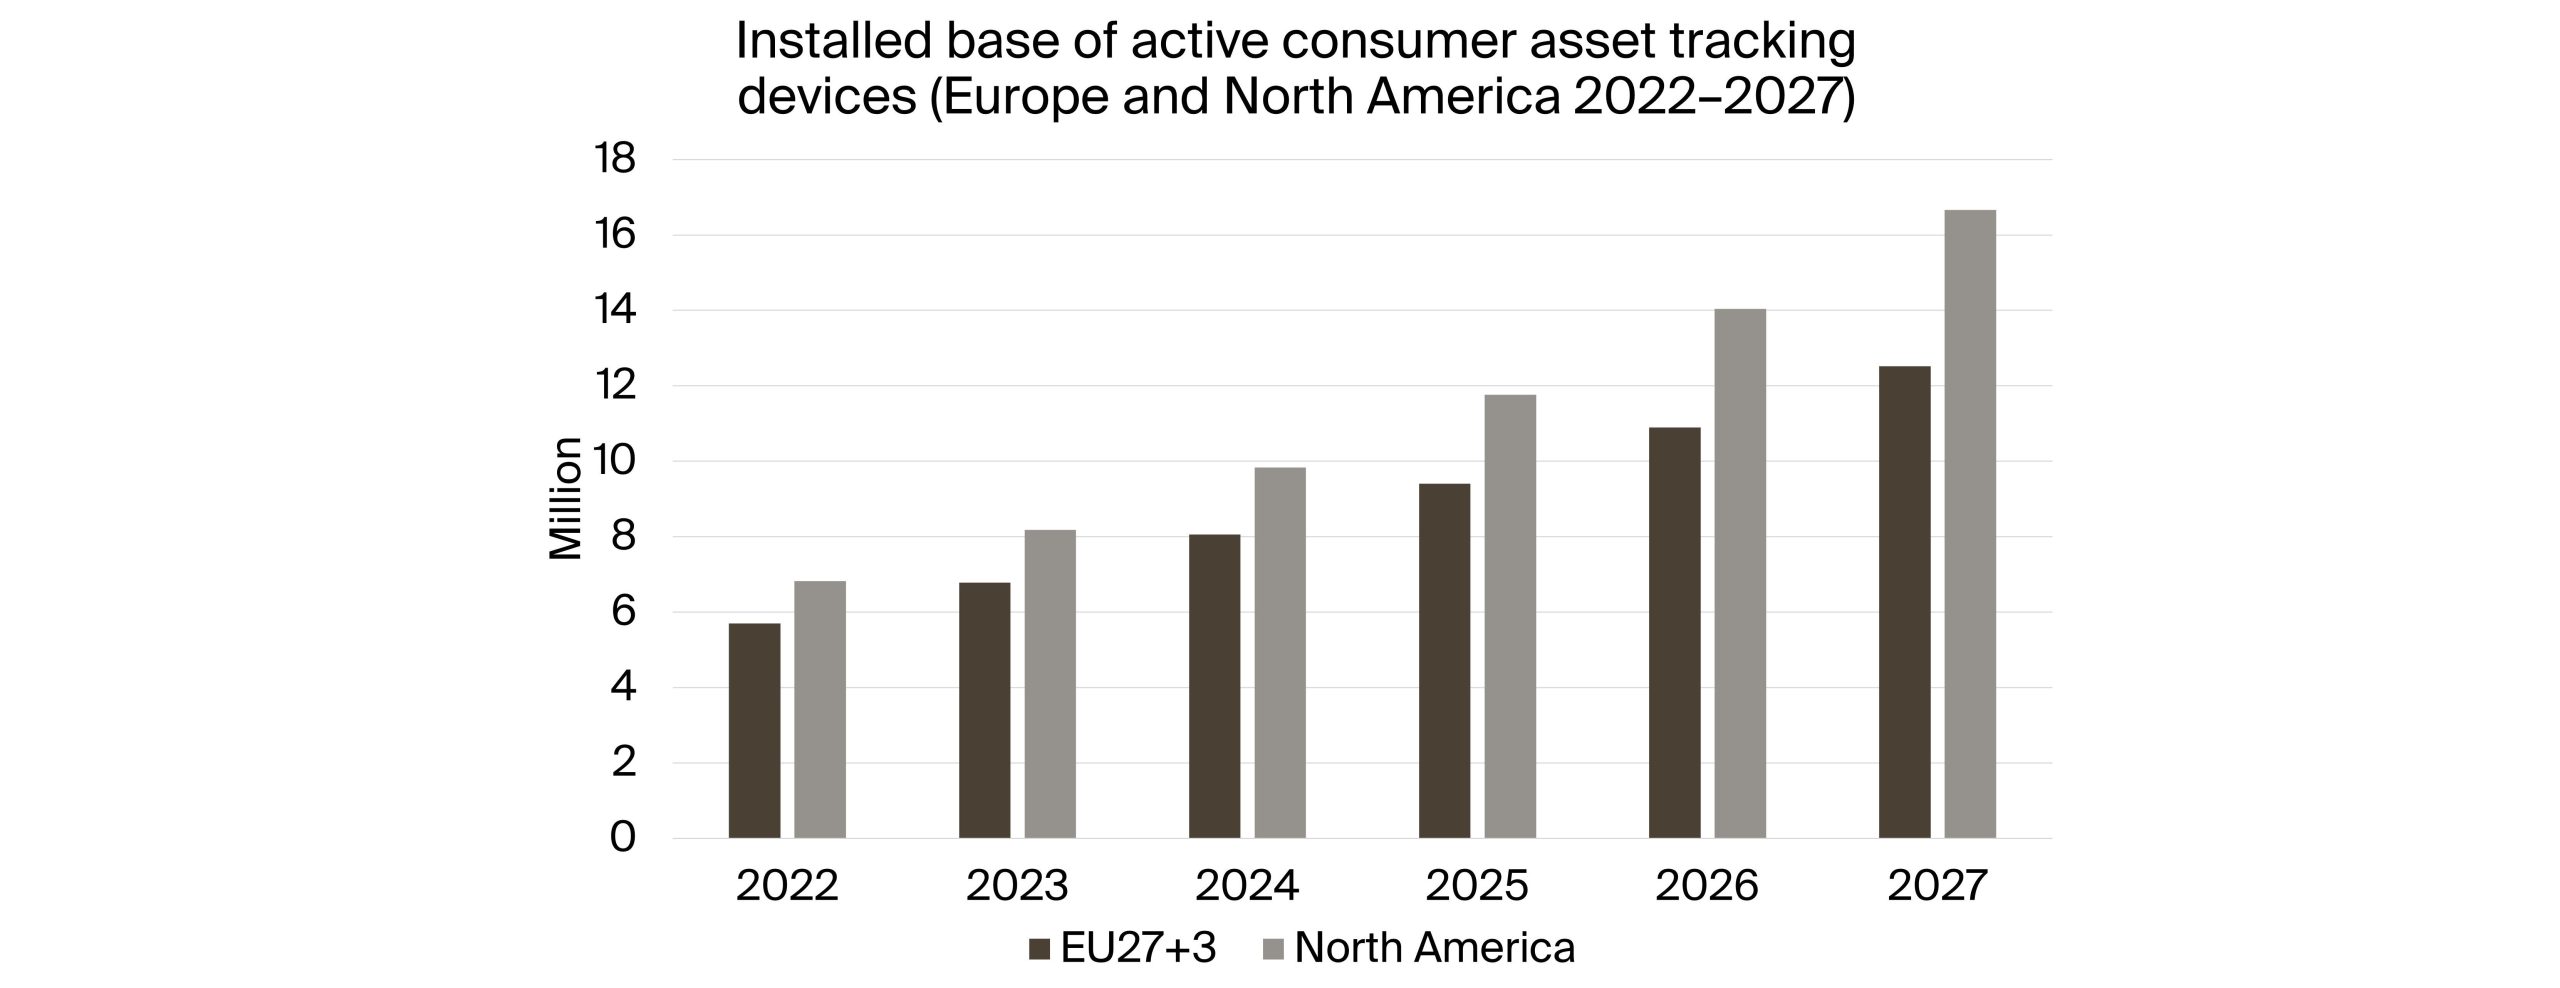 Consumer asset tracking devices to reach 29.2M by 2027